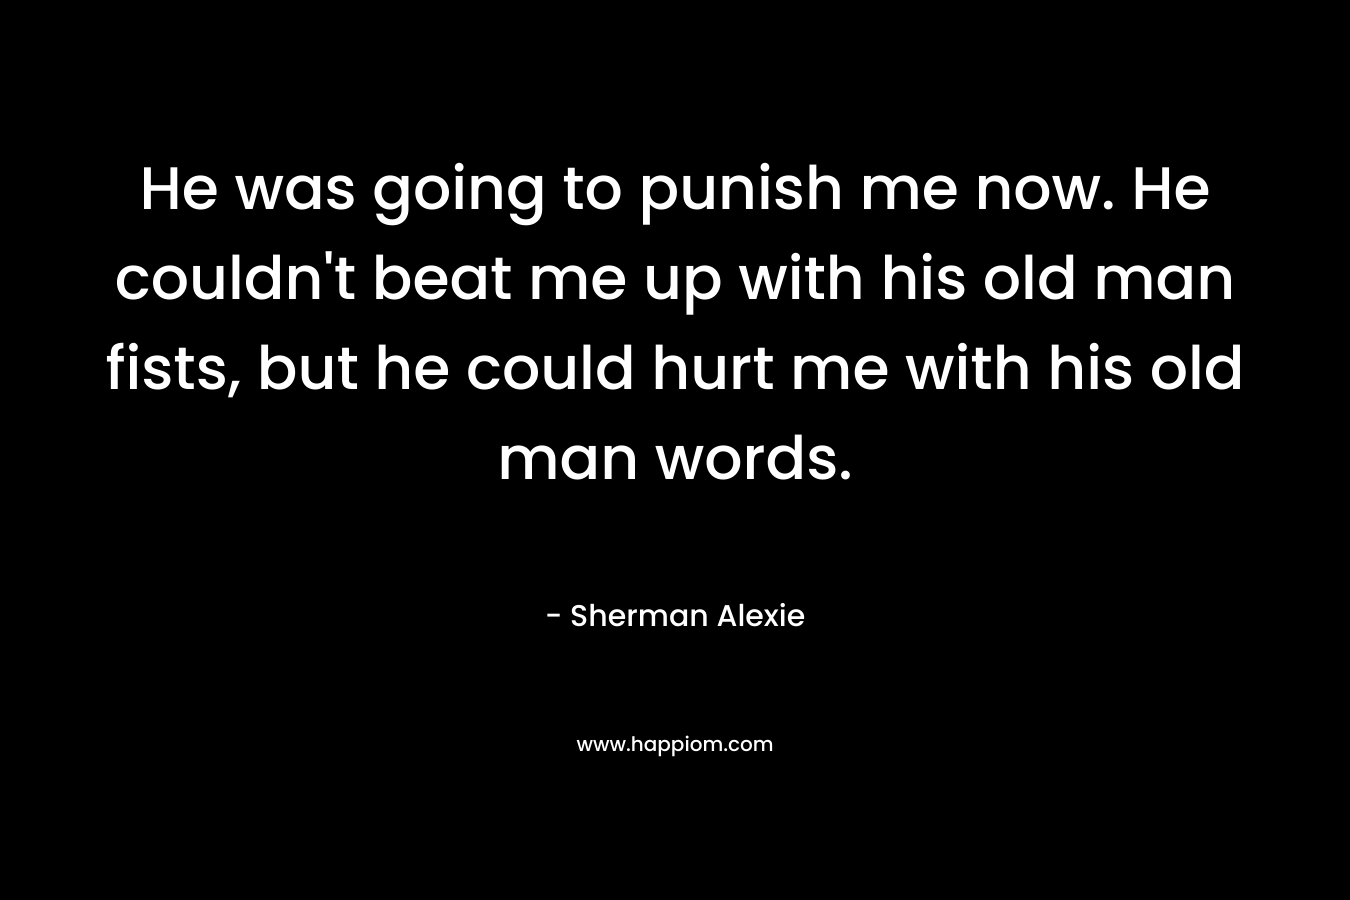 He was going to punish me now. He couldn’t beat me up with his old man fists, but he could hurt me with his old man words. – Sherman Alexie